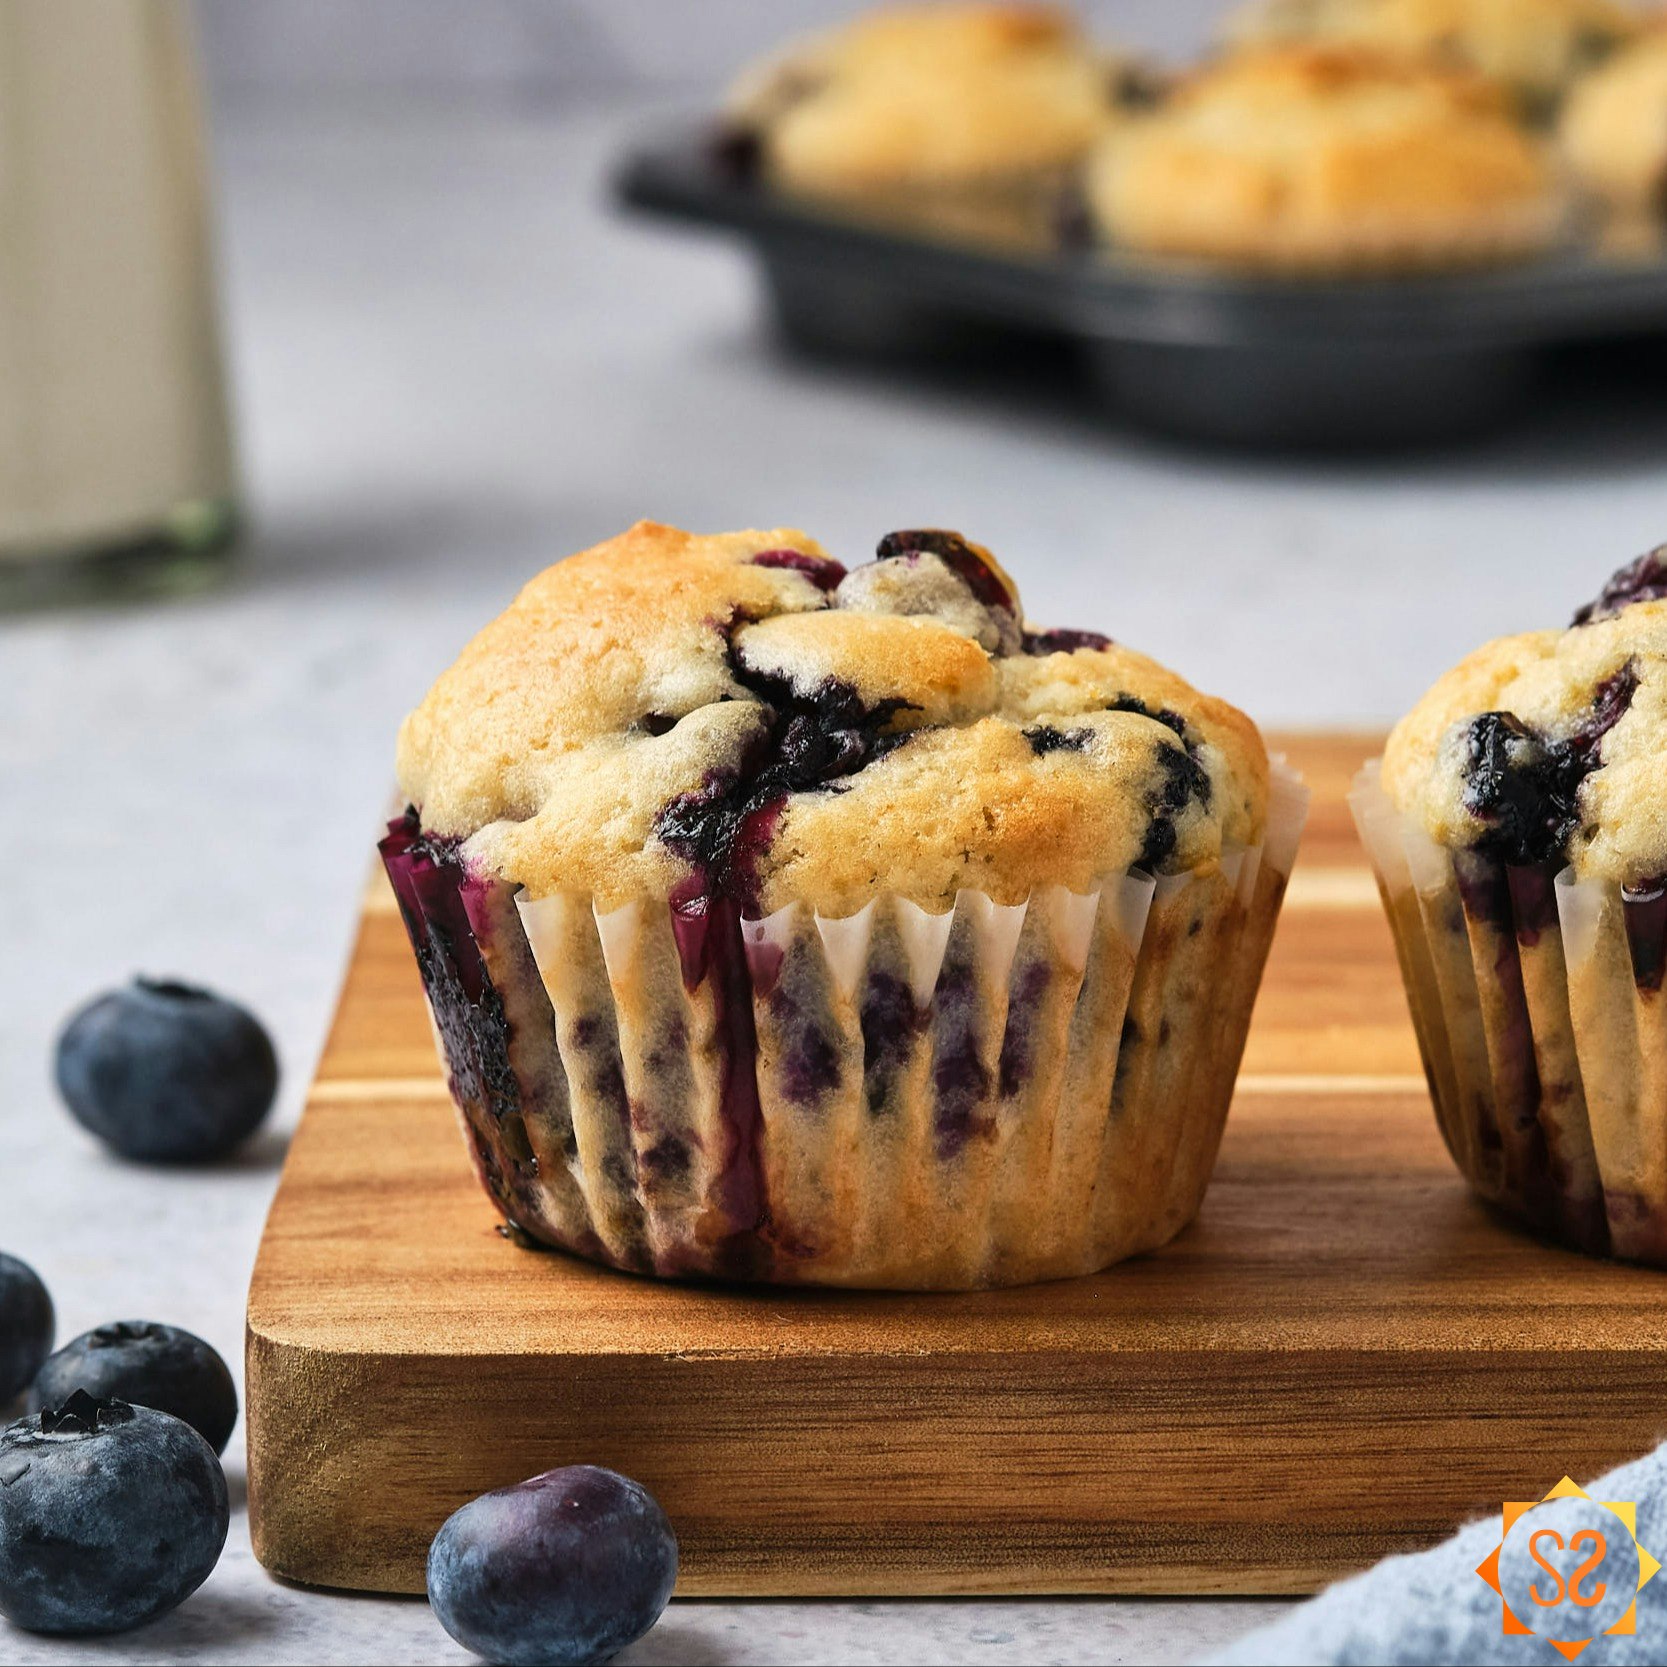 Vegan blueberry muffins on a wooden platter, with plant based milk and a tray of more muffins in the background.